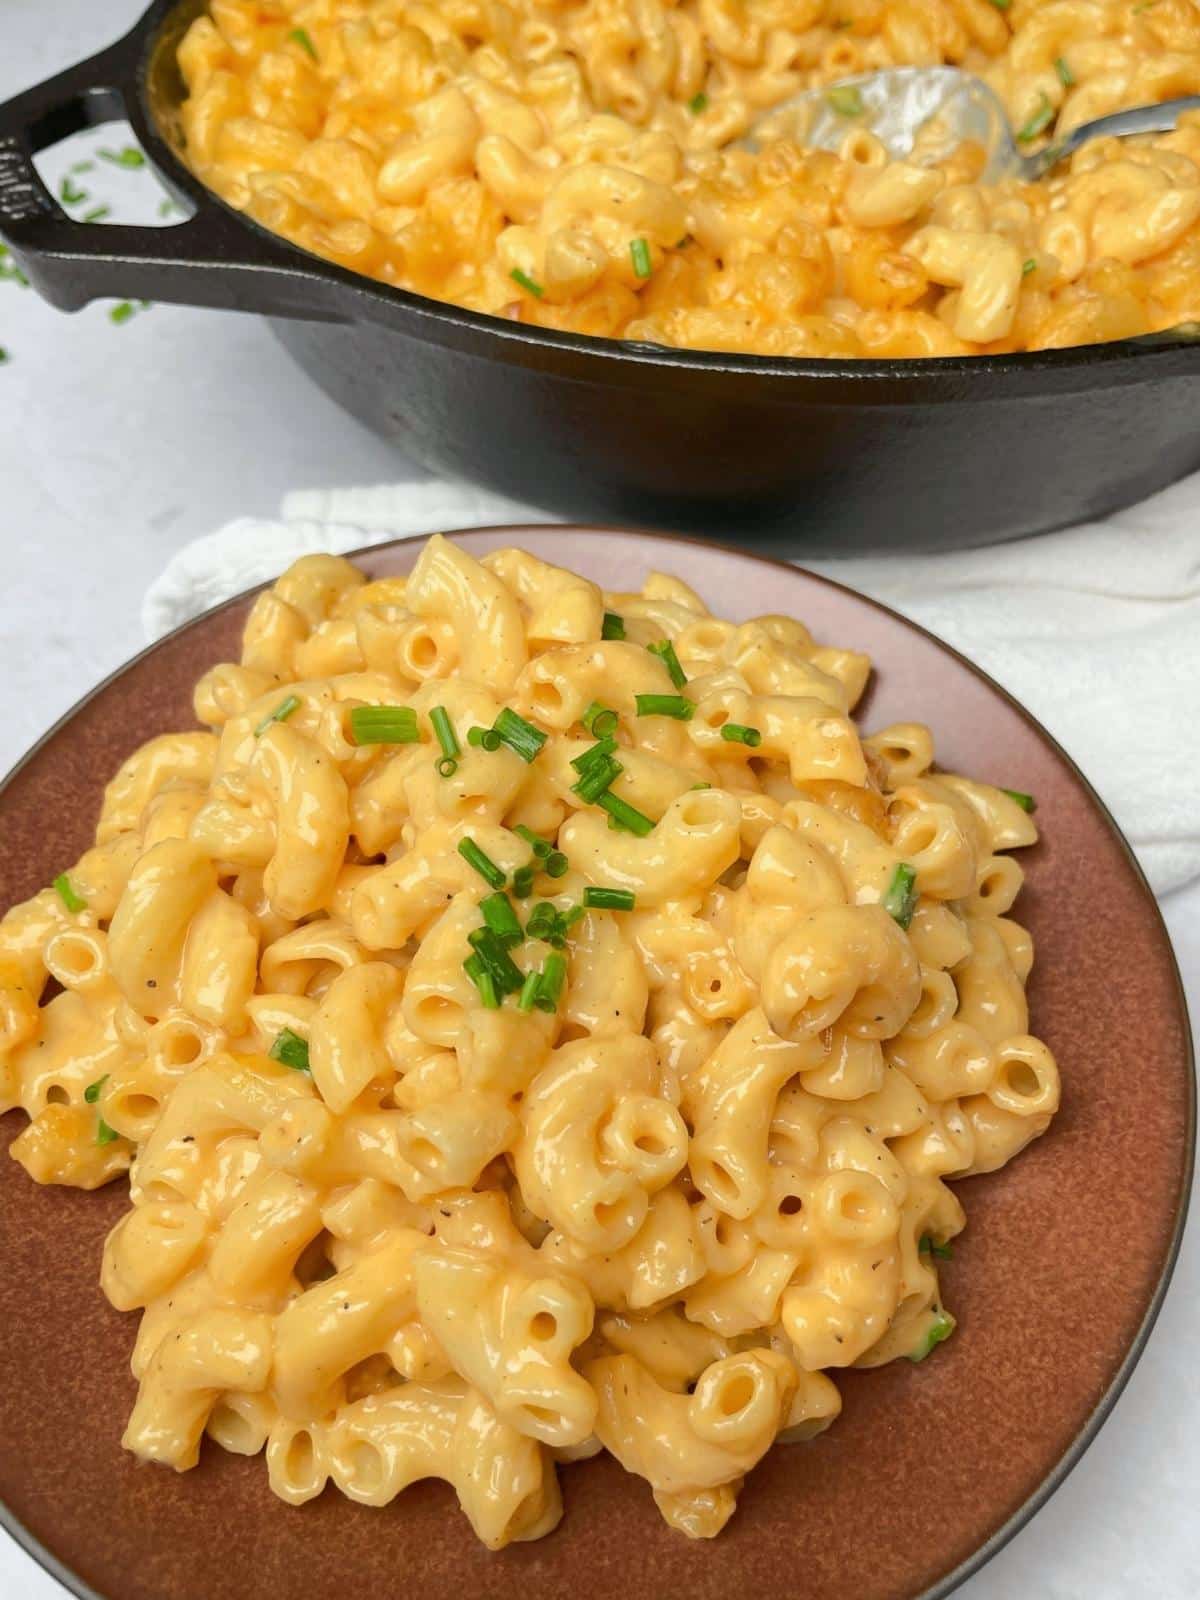 Mac and cheese on a plate.